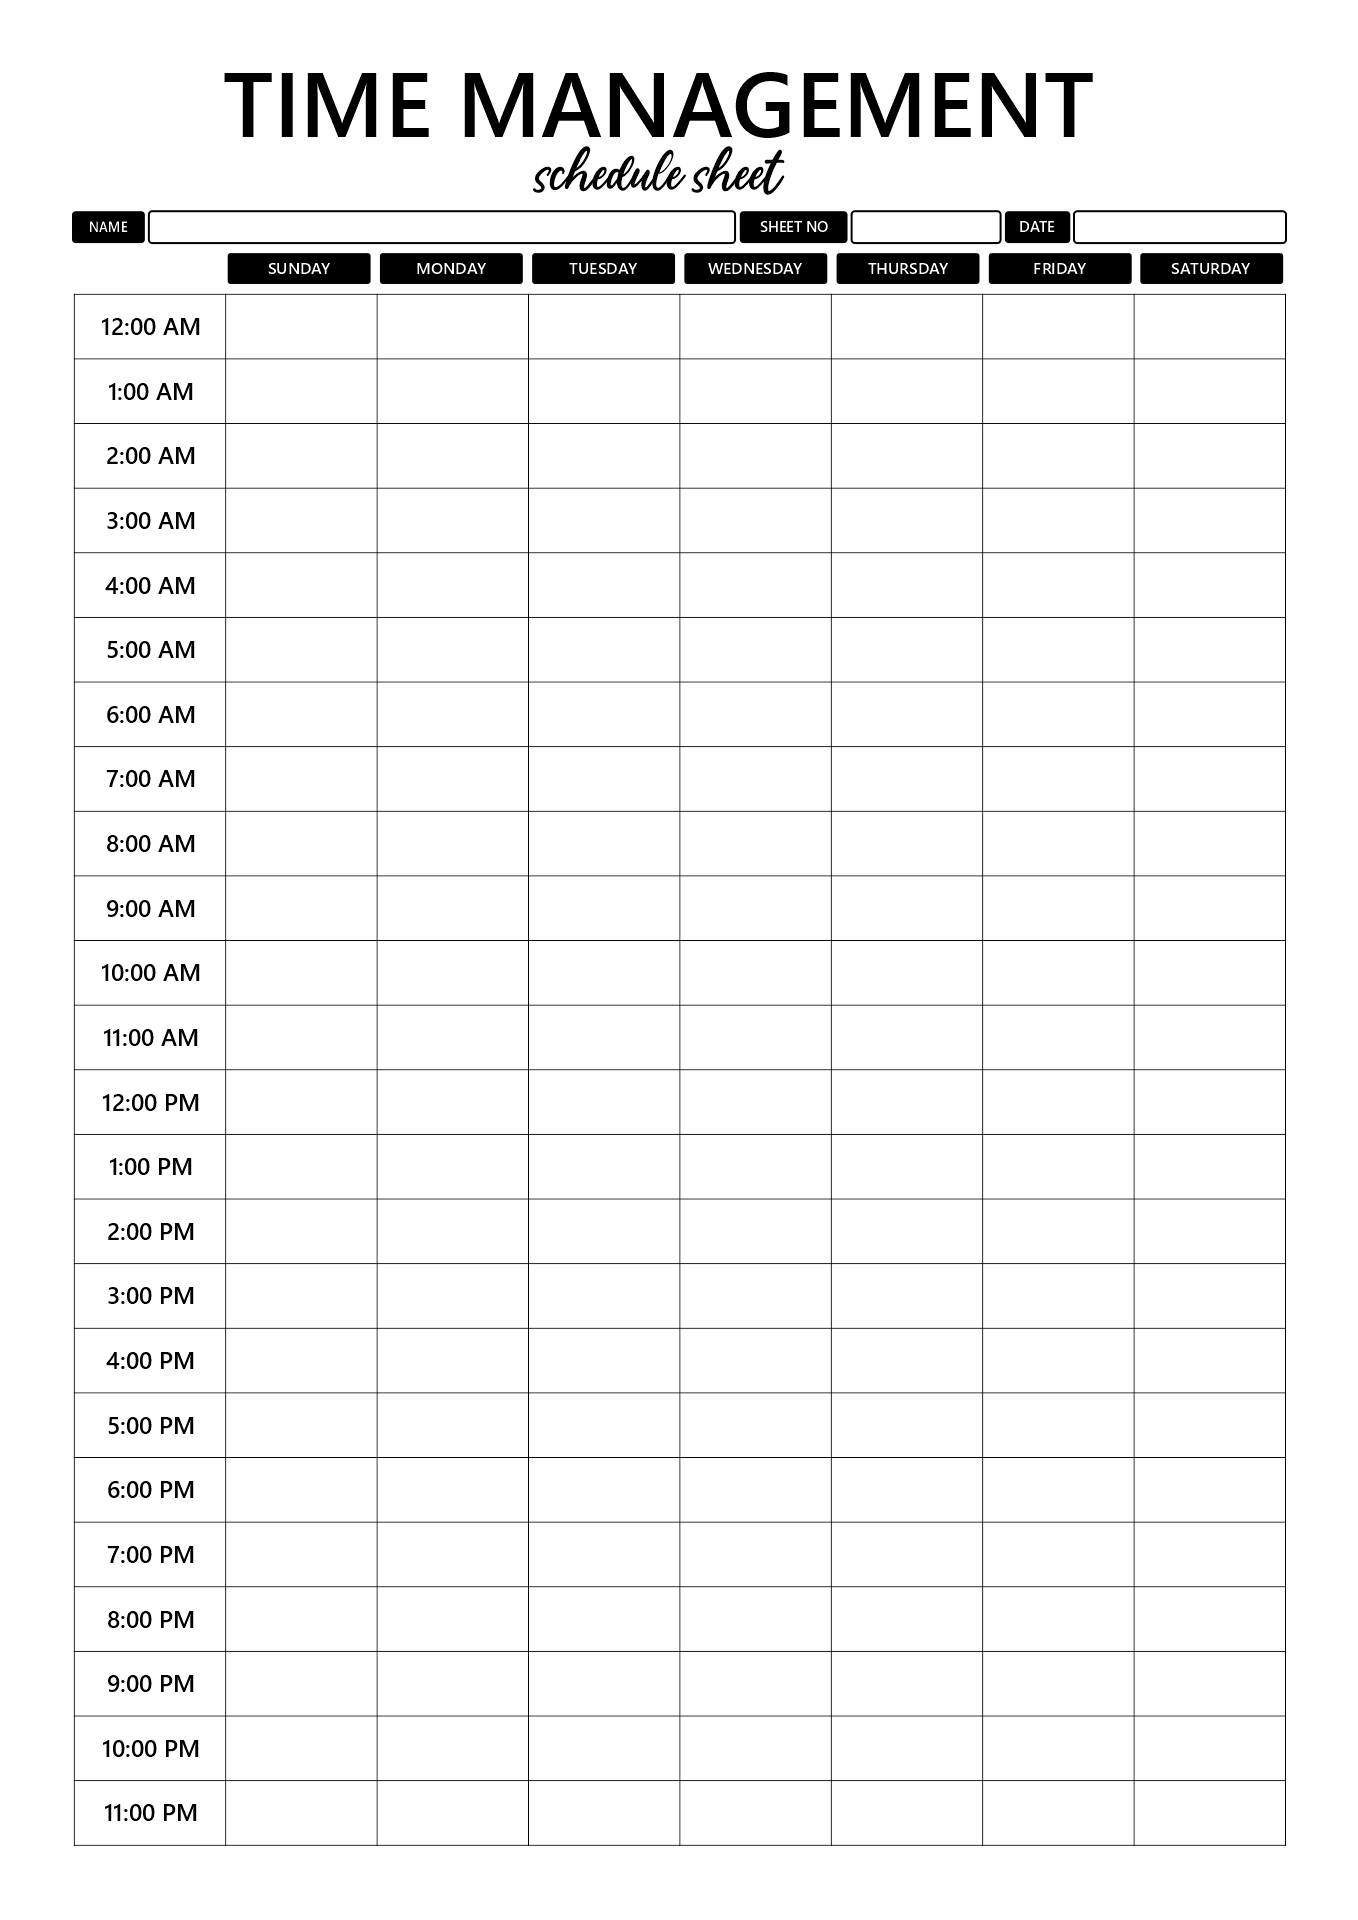 18 Best Images of Time Management Schedule Worksheets Free Time